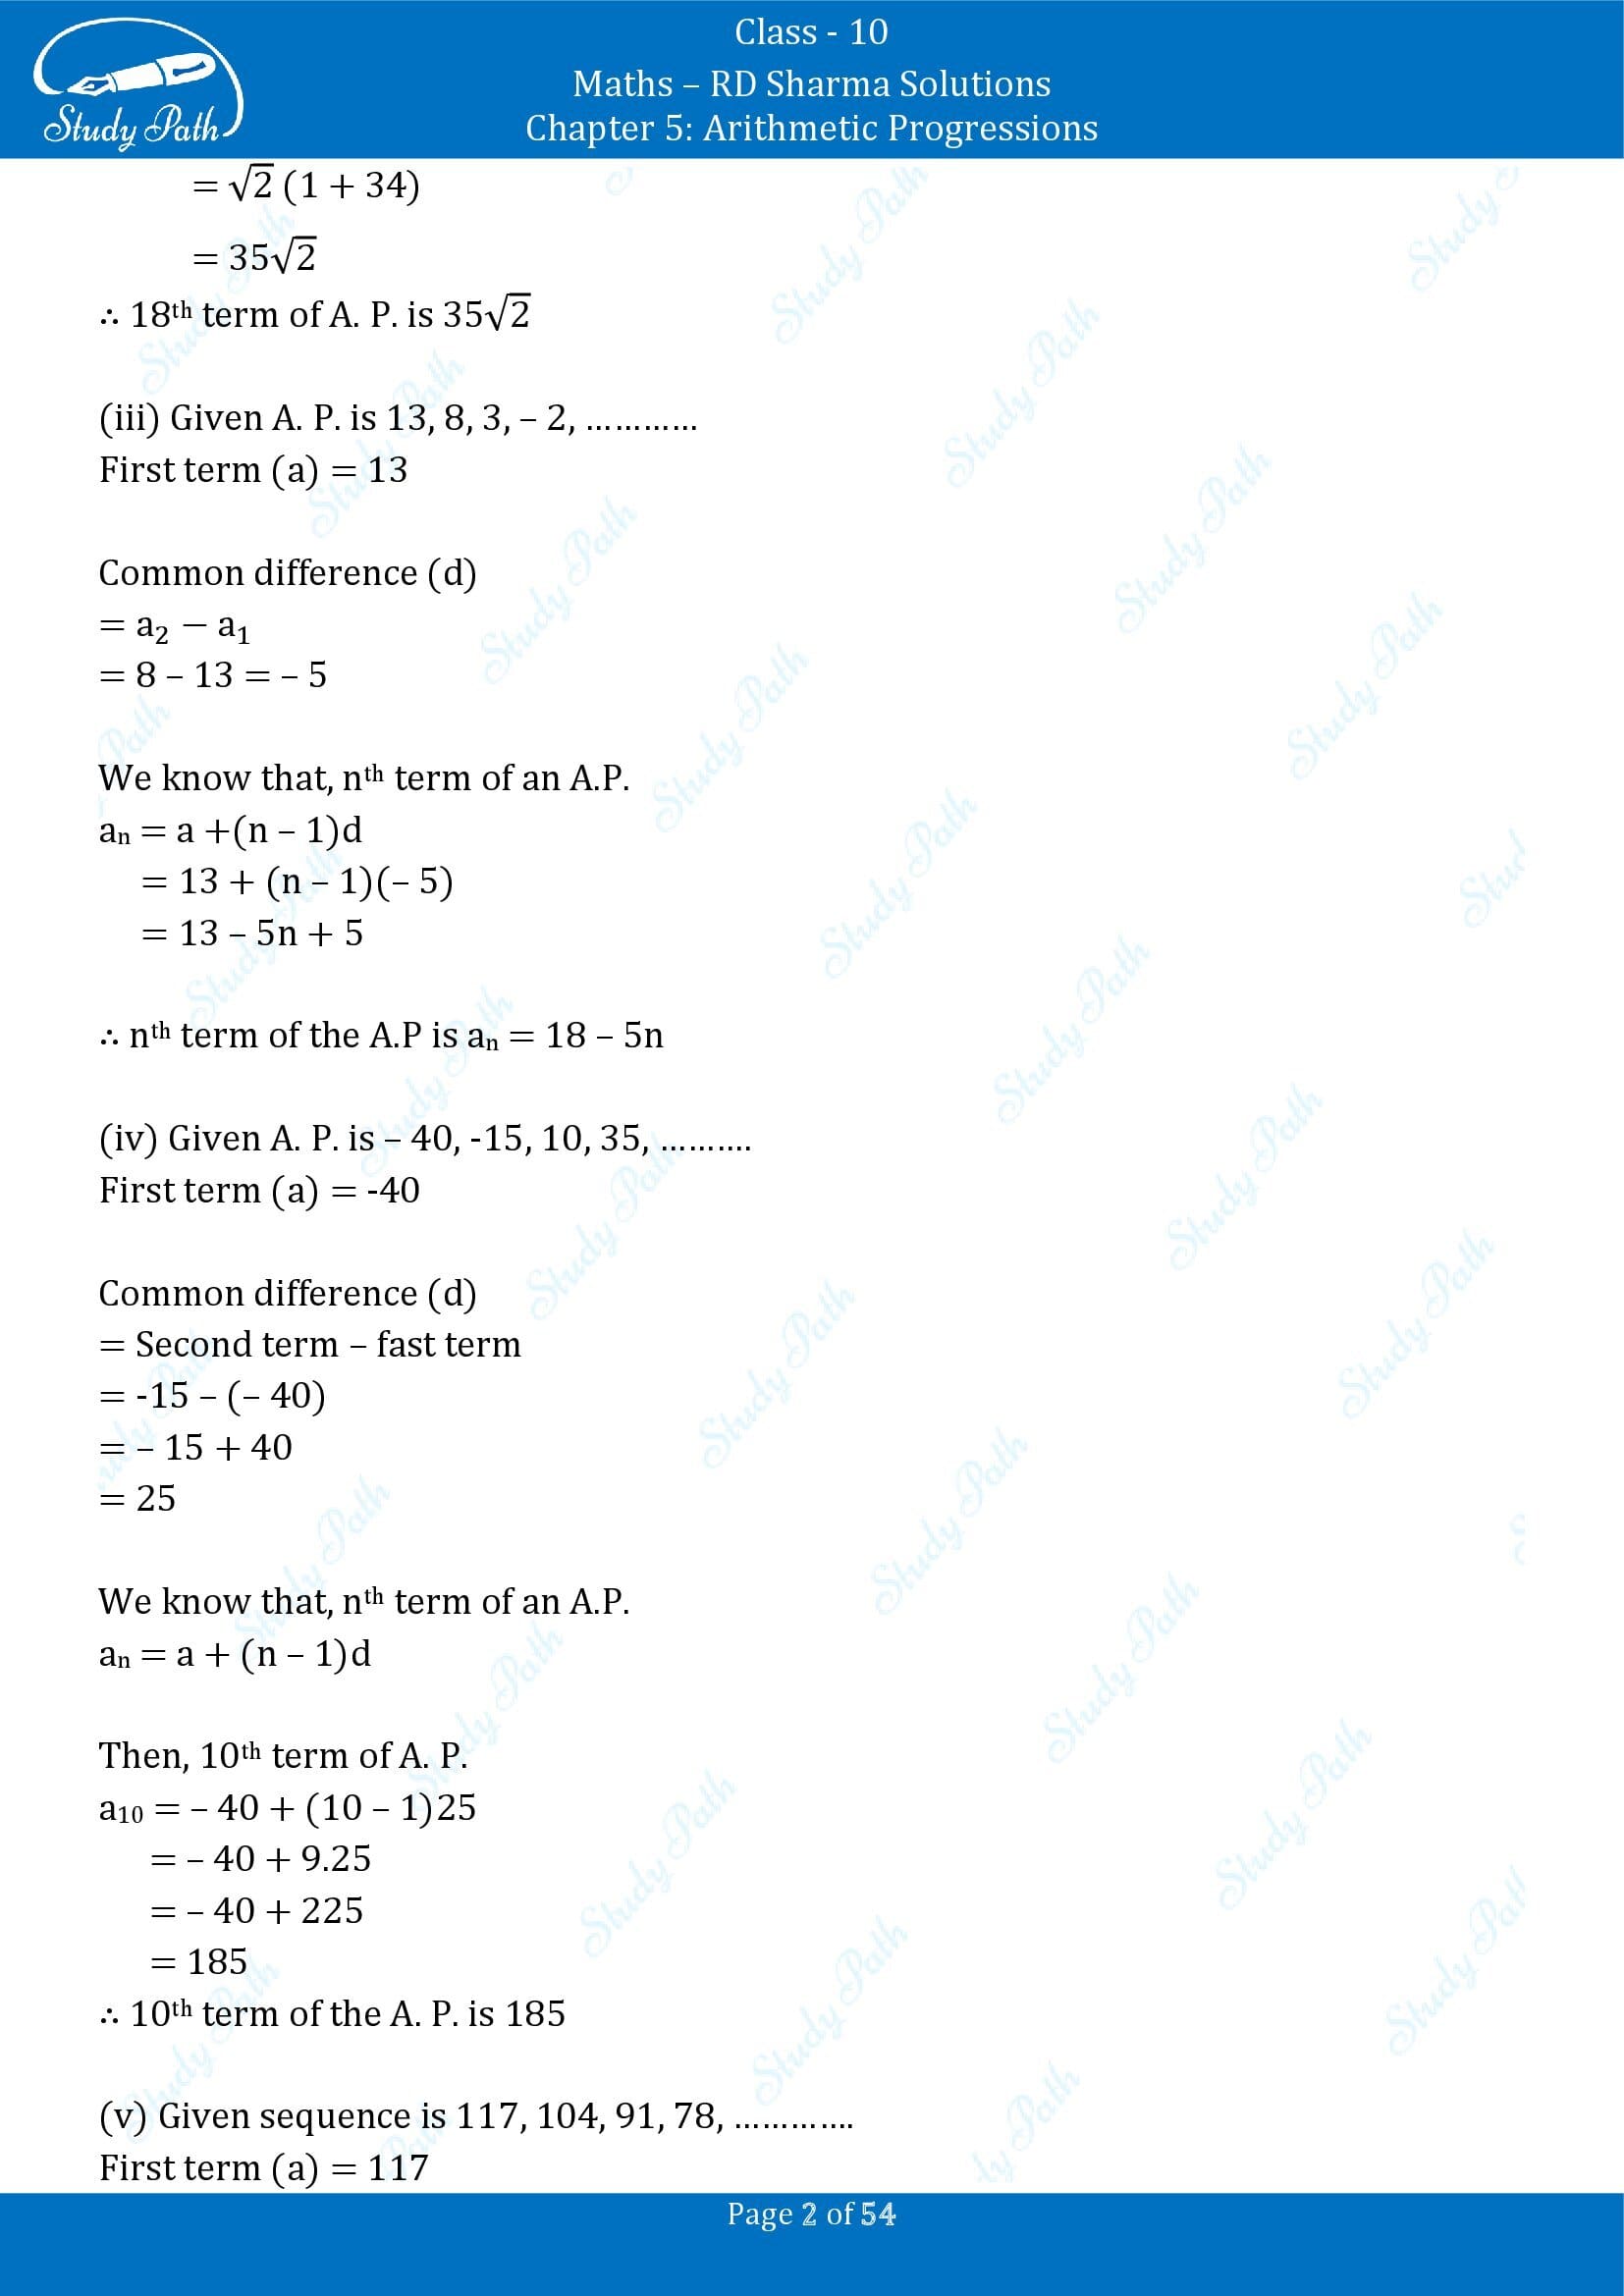 RD Sharma Solutions Class 10 Chapter 5 Arithmetic Progressions Exercise 5.4 00002